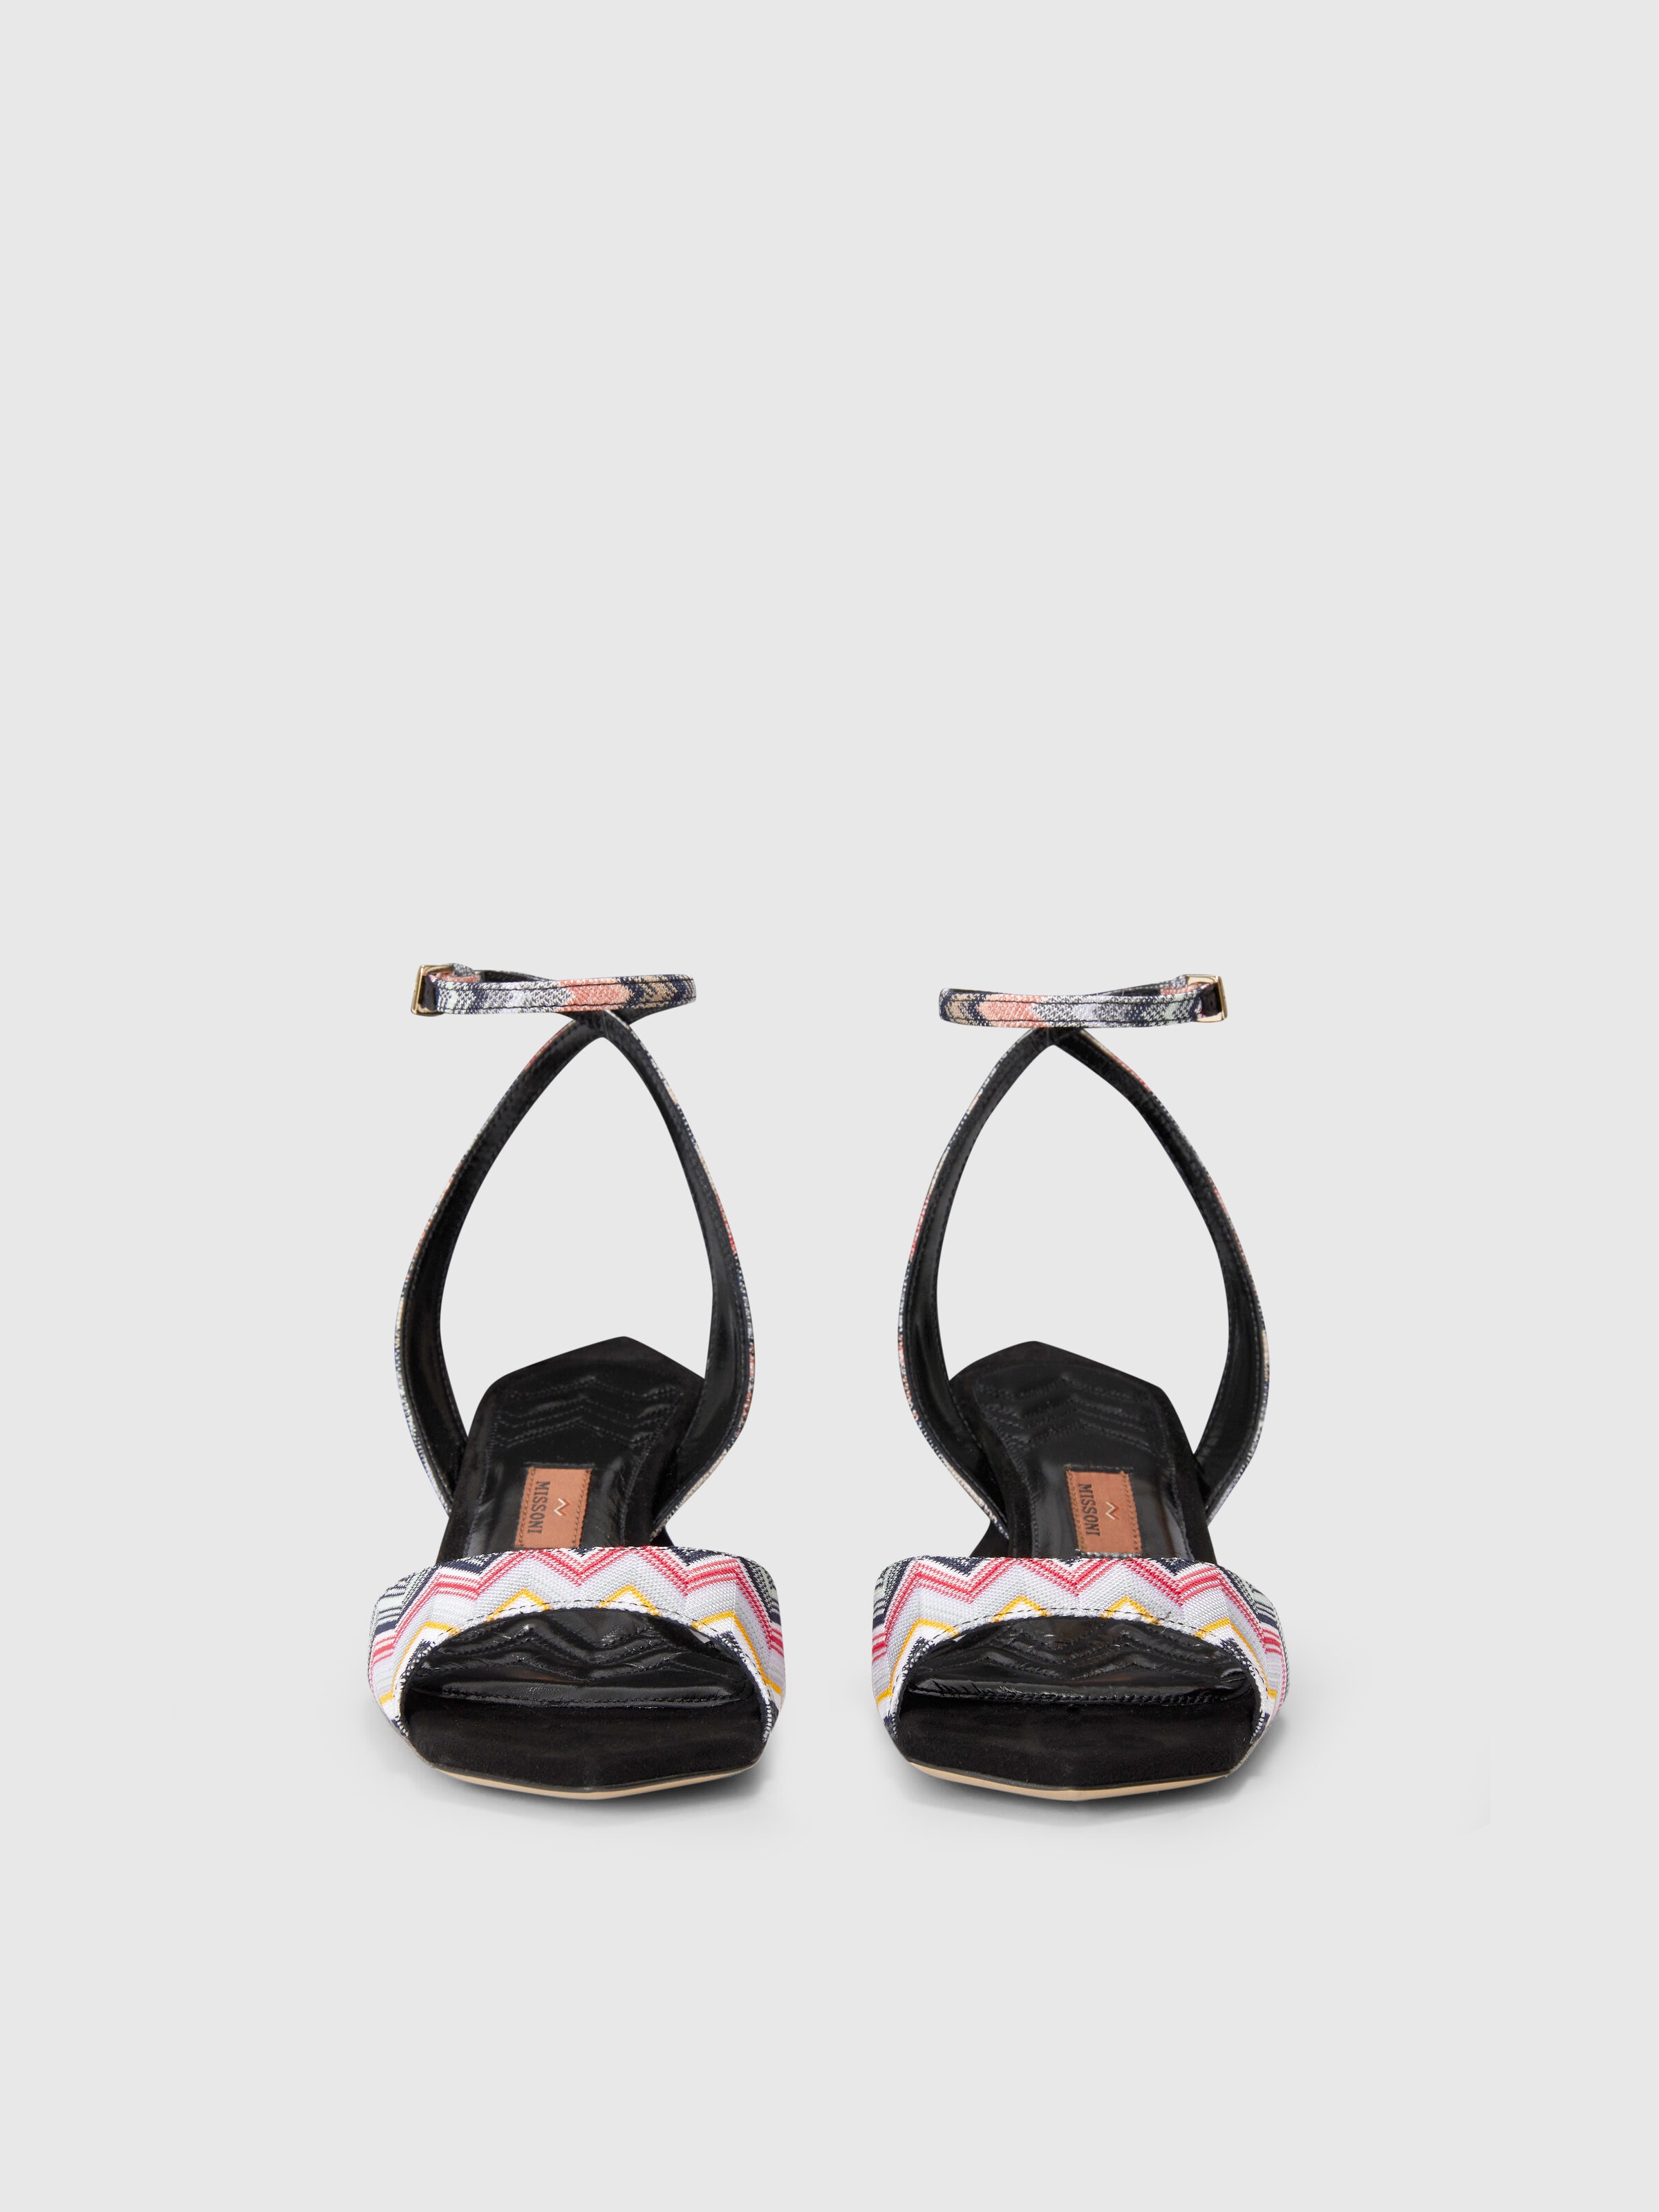 Sandals with strap and chevron pattern, Black    - 2